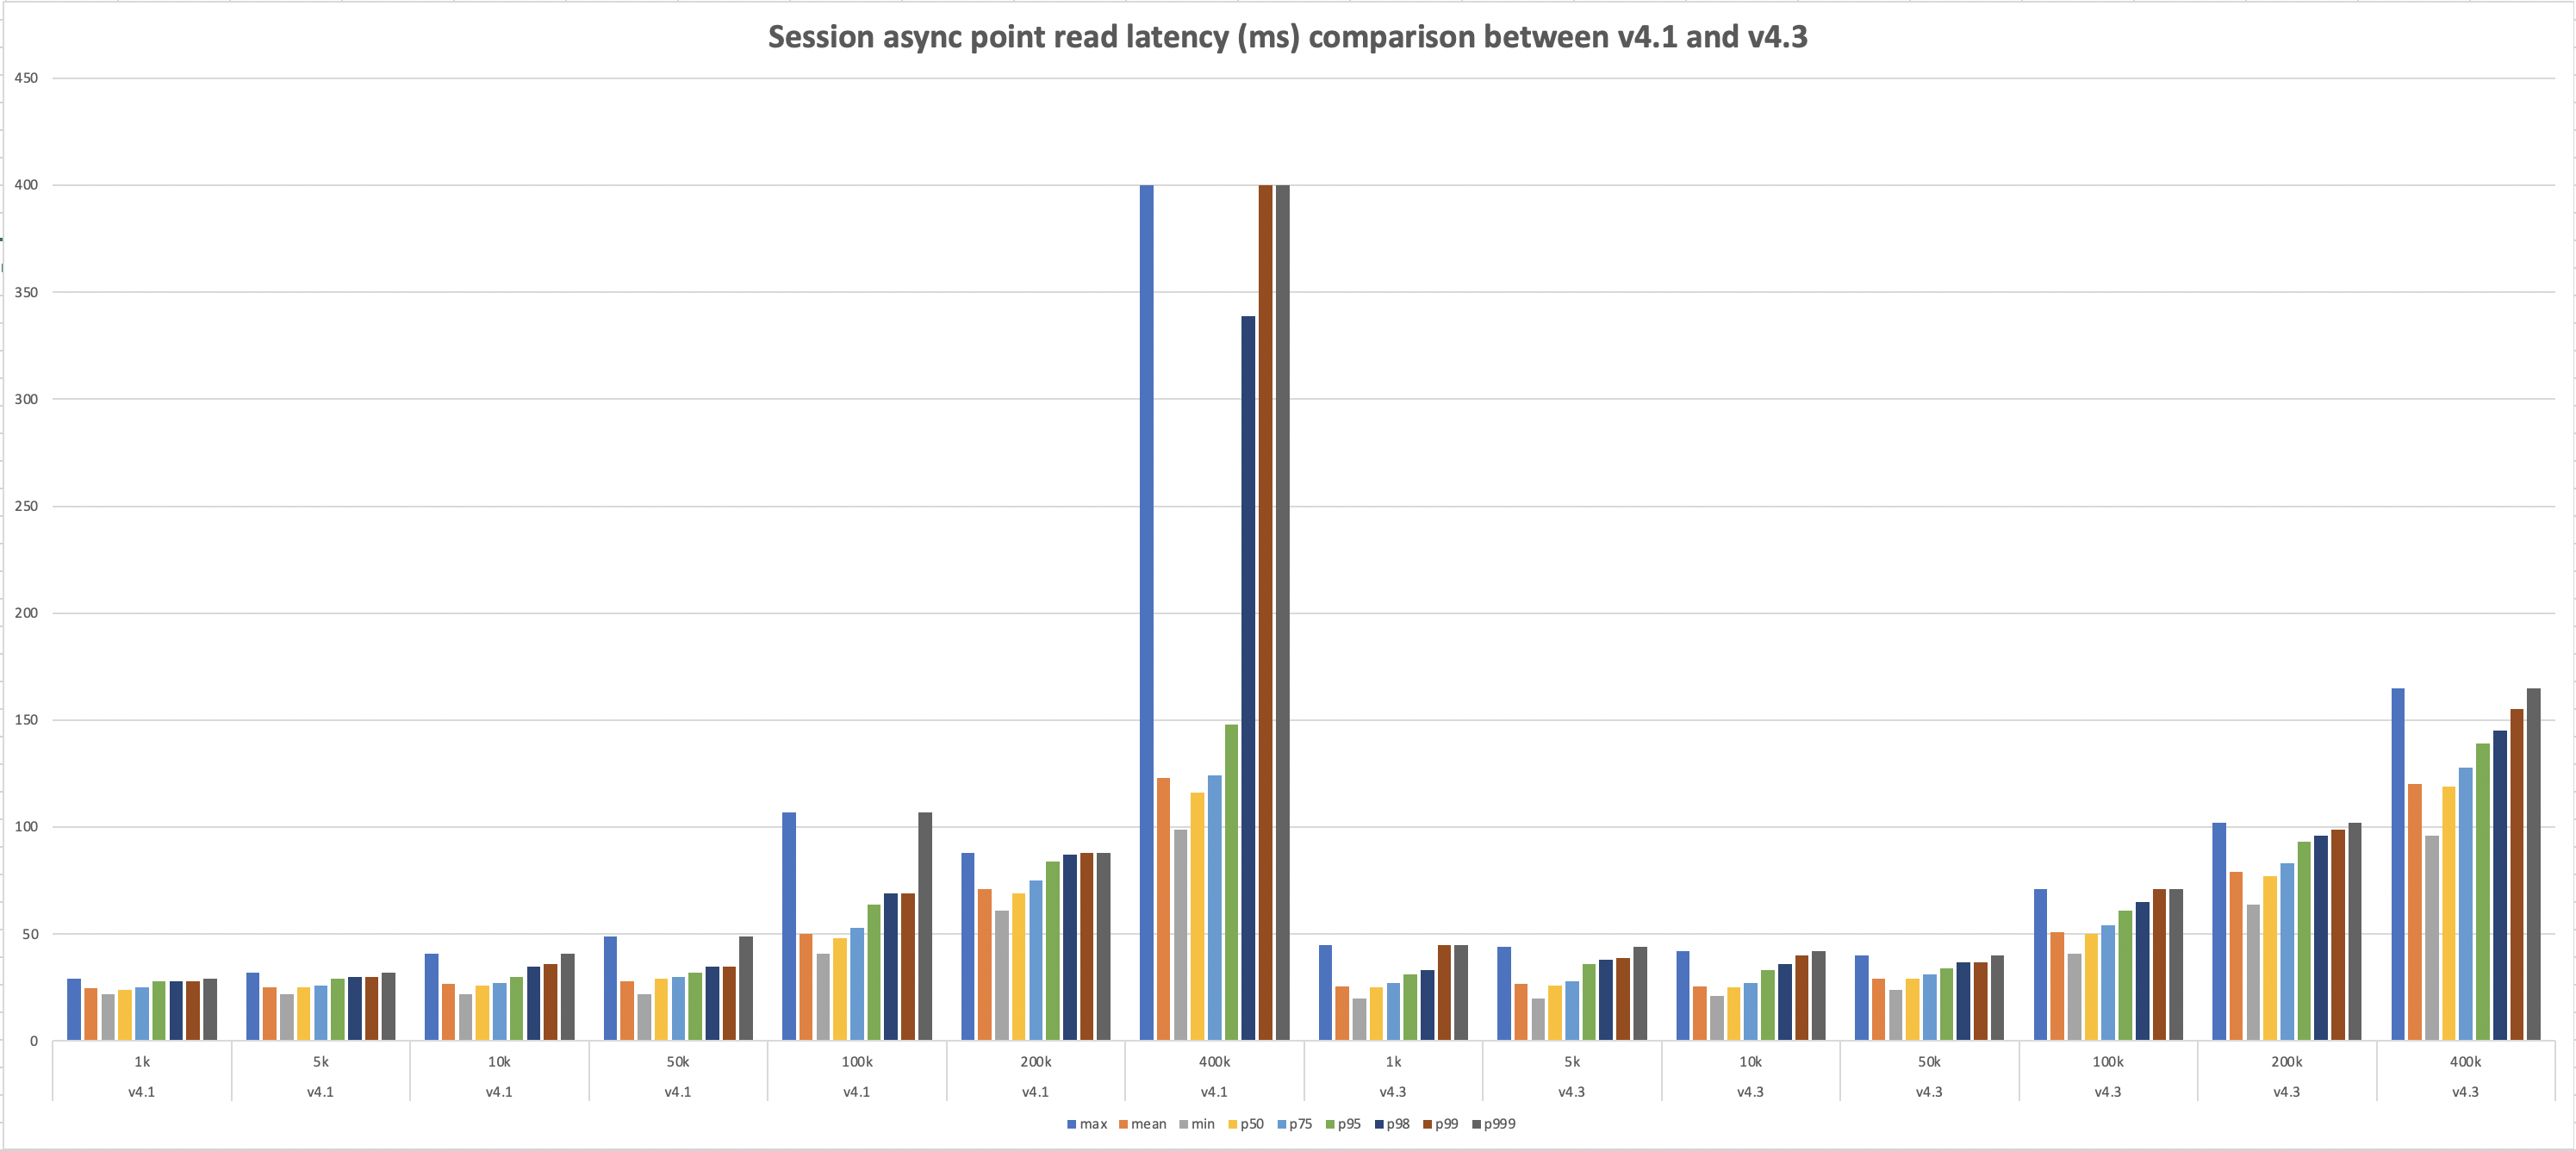 Session async point read latency (ms) comparison between v4.1 and v4.3.png